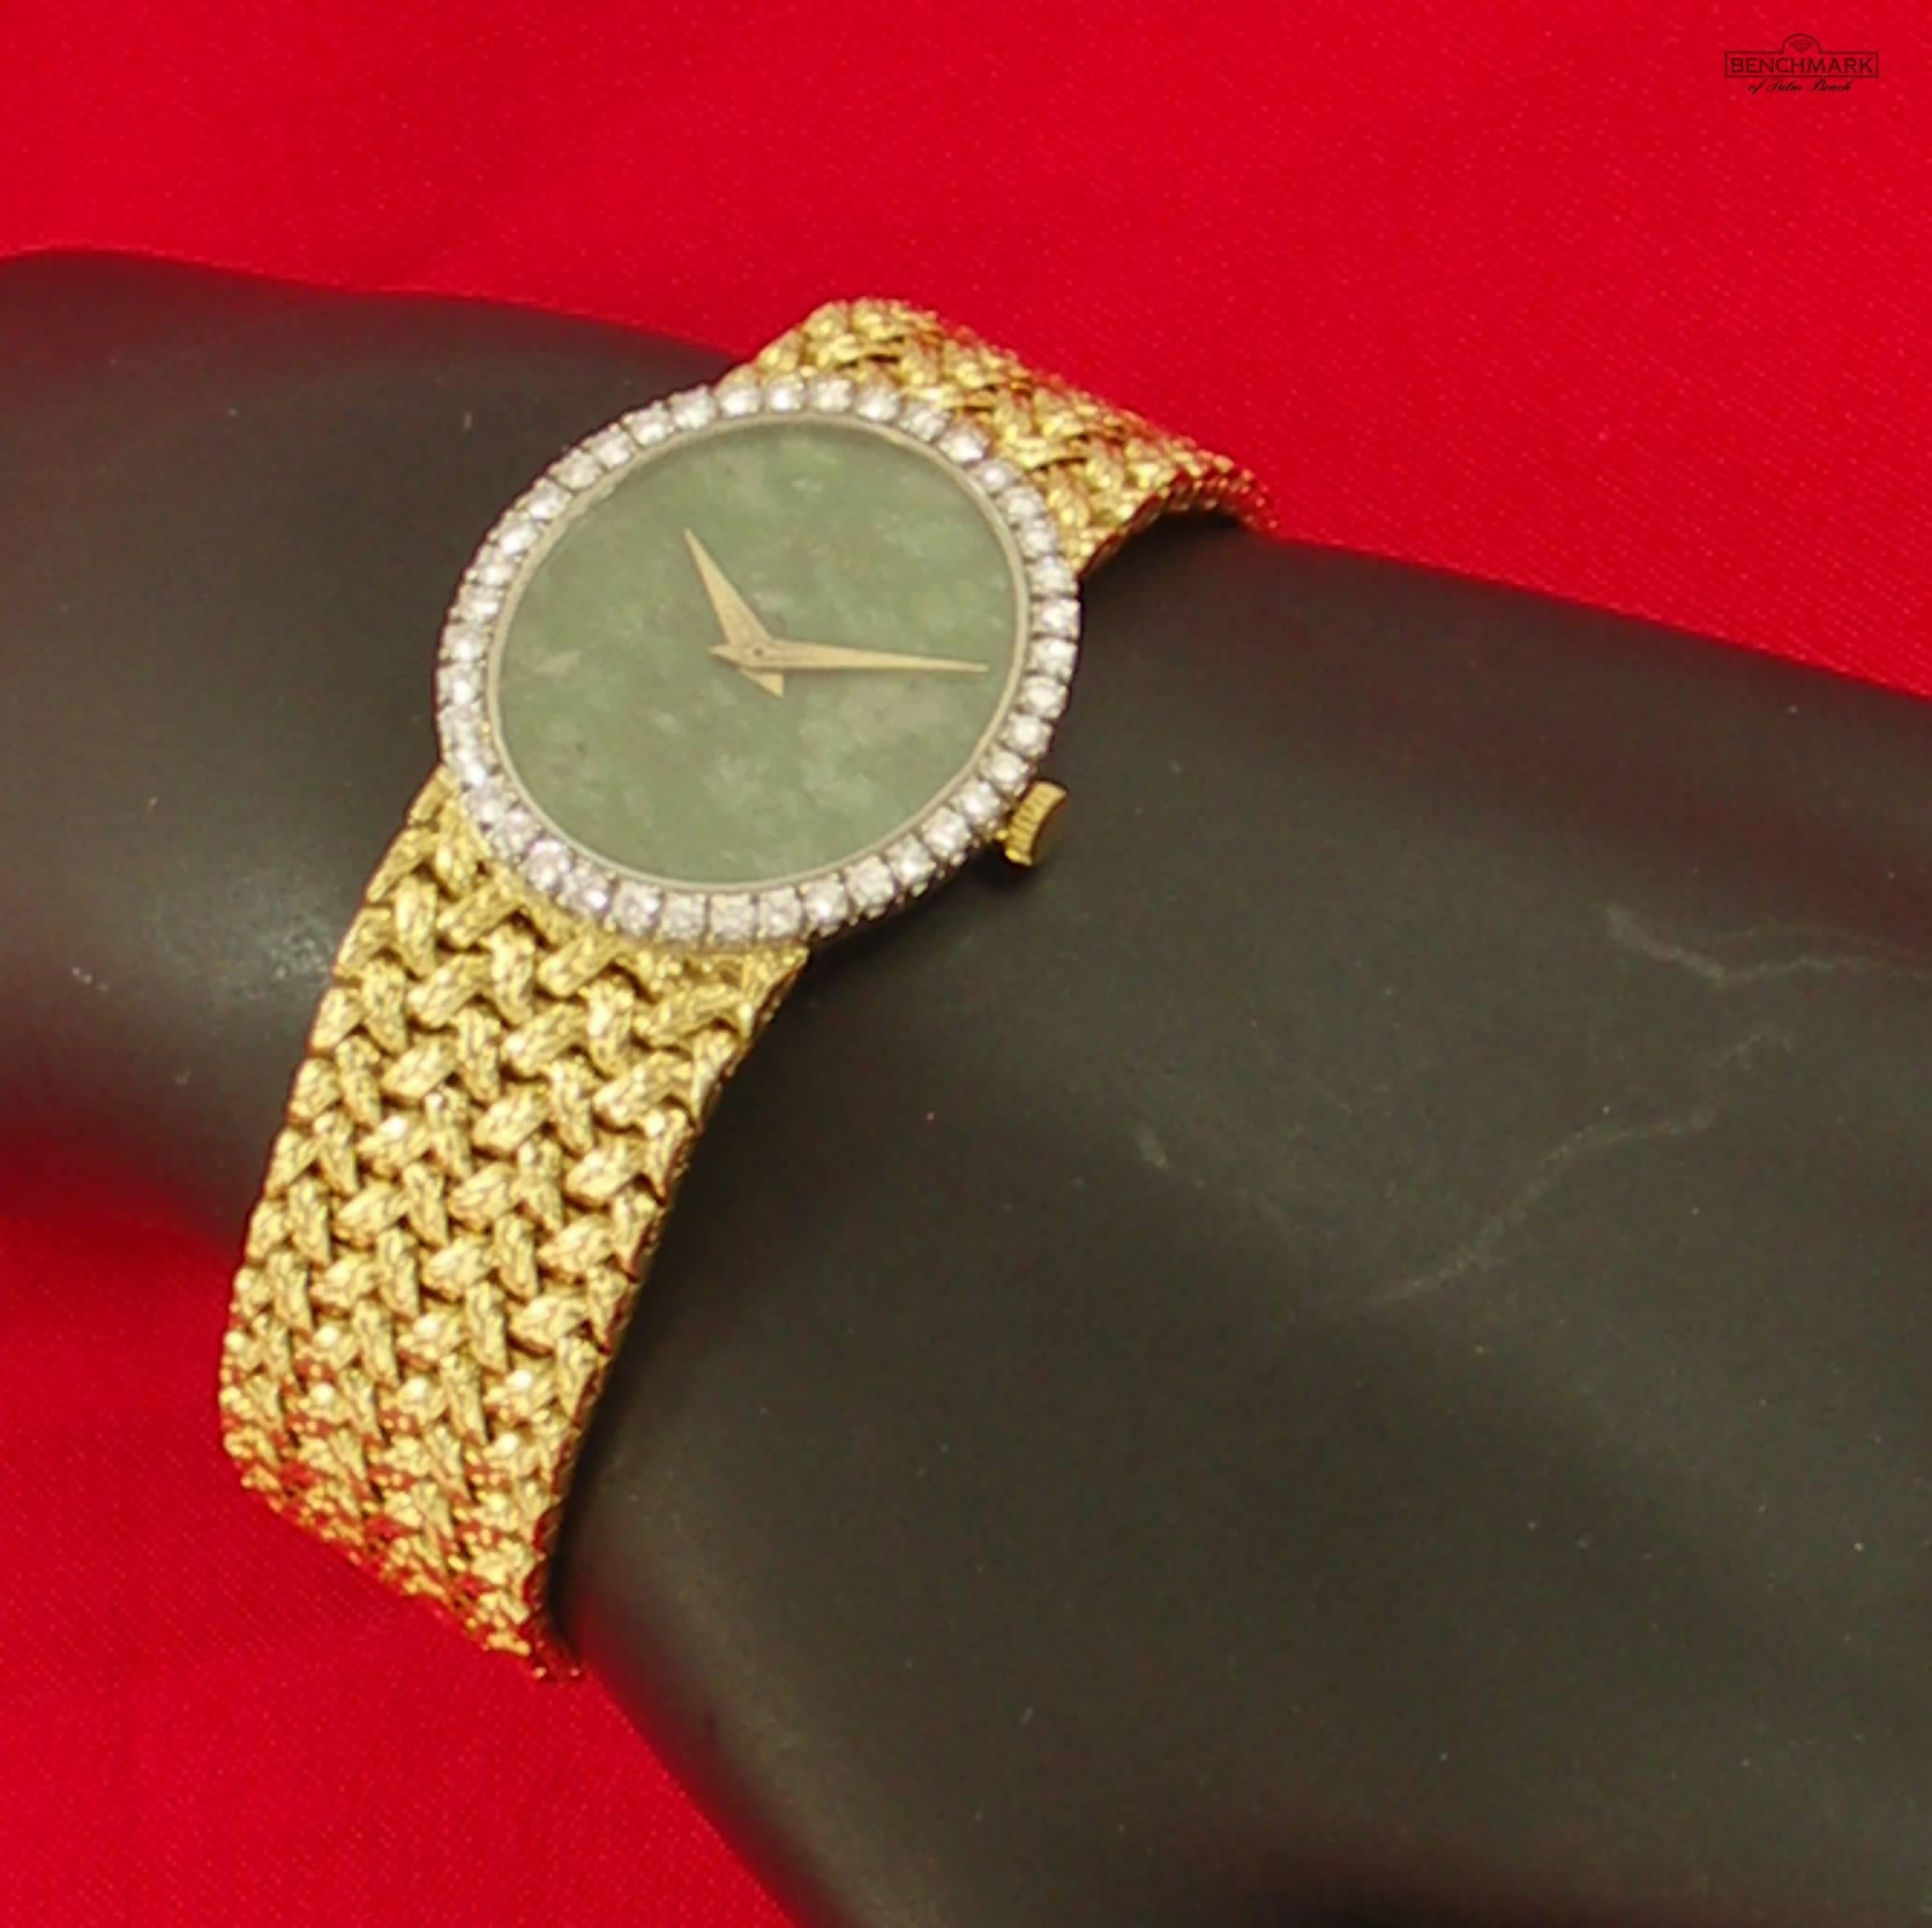 One ladies 18K yellow gold wristwatch with a woven bracelet, and centered around a vertical oval green jade dial. The bezel is comprised of 40 round brilliant cut diamonds weighing 1ct total approximate weight, utilizing four prong settings. The